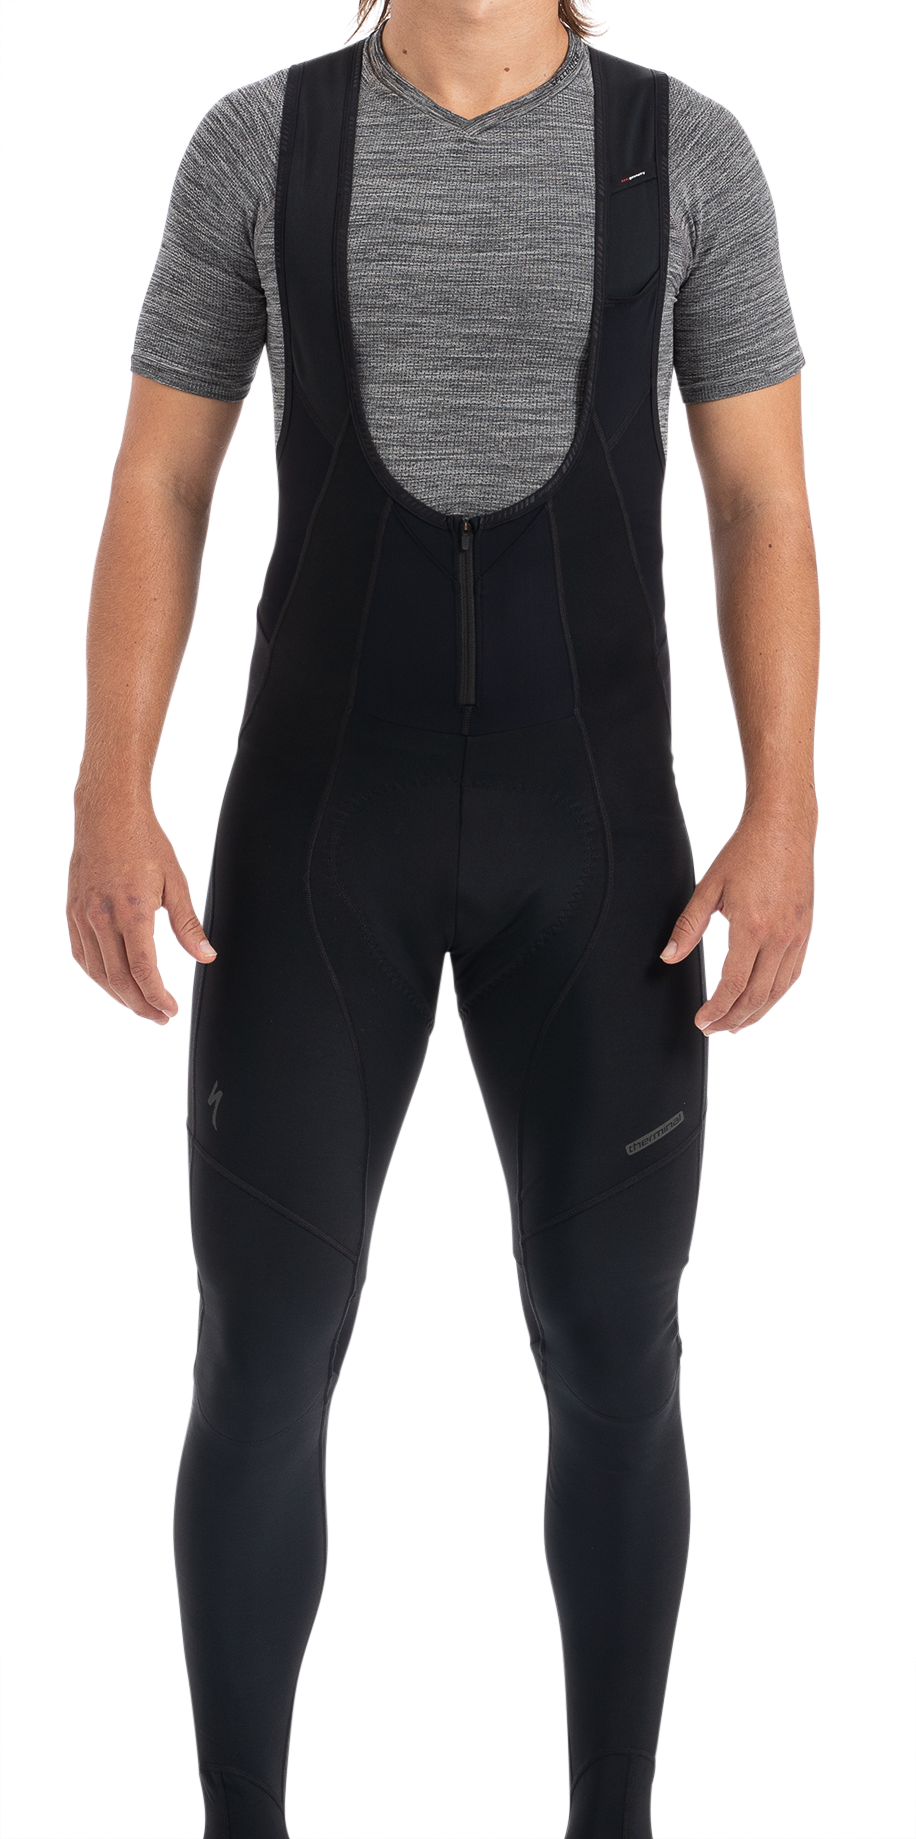 https://assets.specialized.com/i/specialized/64220-050_APP_THERMINAL-CYCLING-BIB-TIGHT-BLK-M_HERO?$scom-pdp-product-image$&fmt=auto